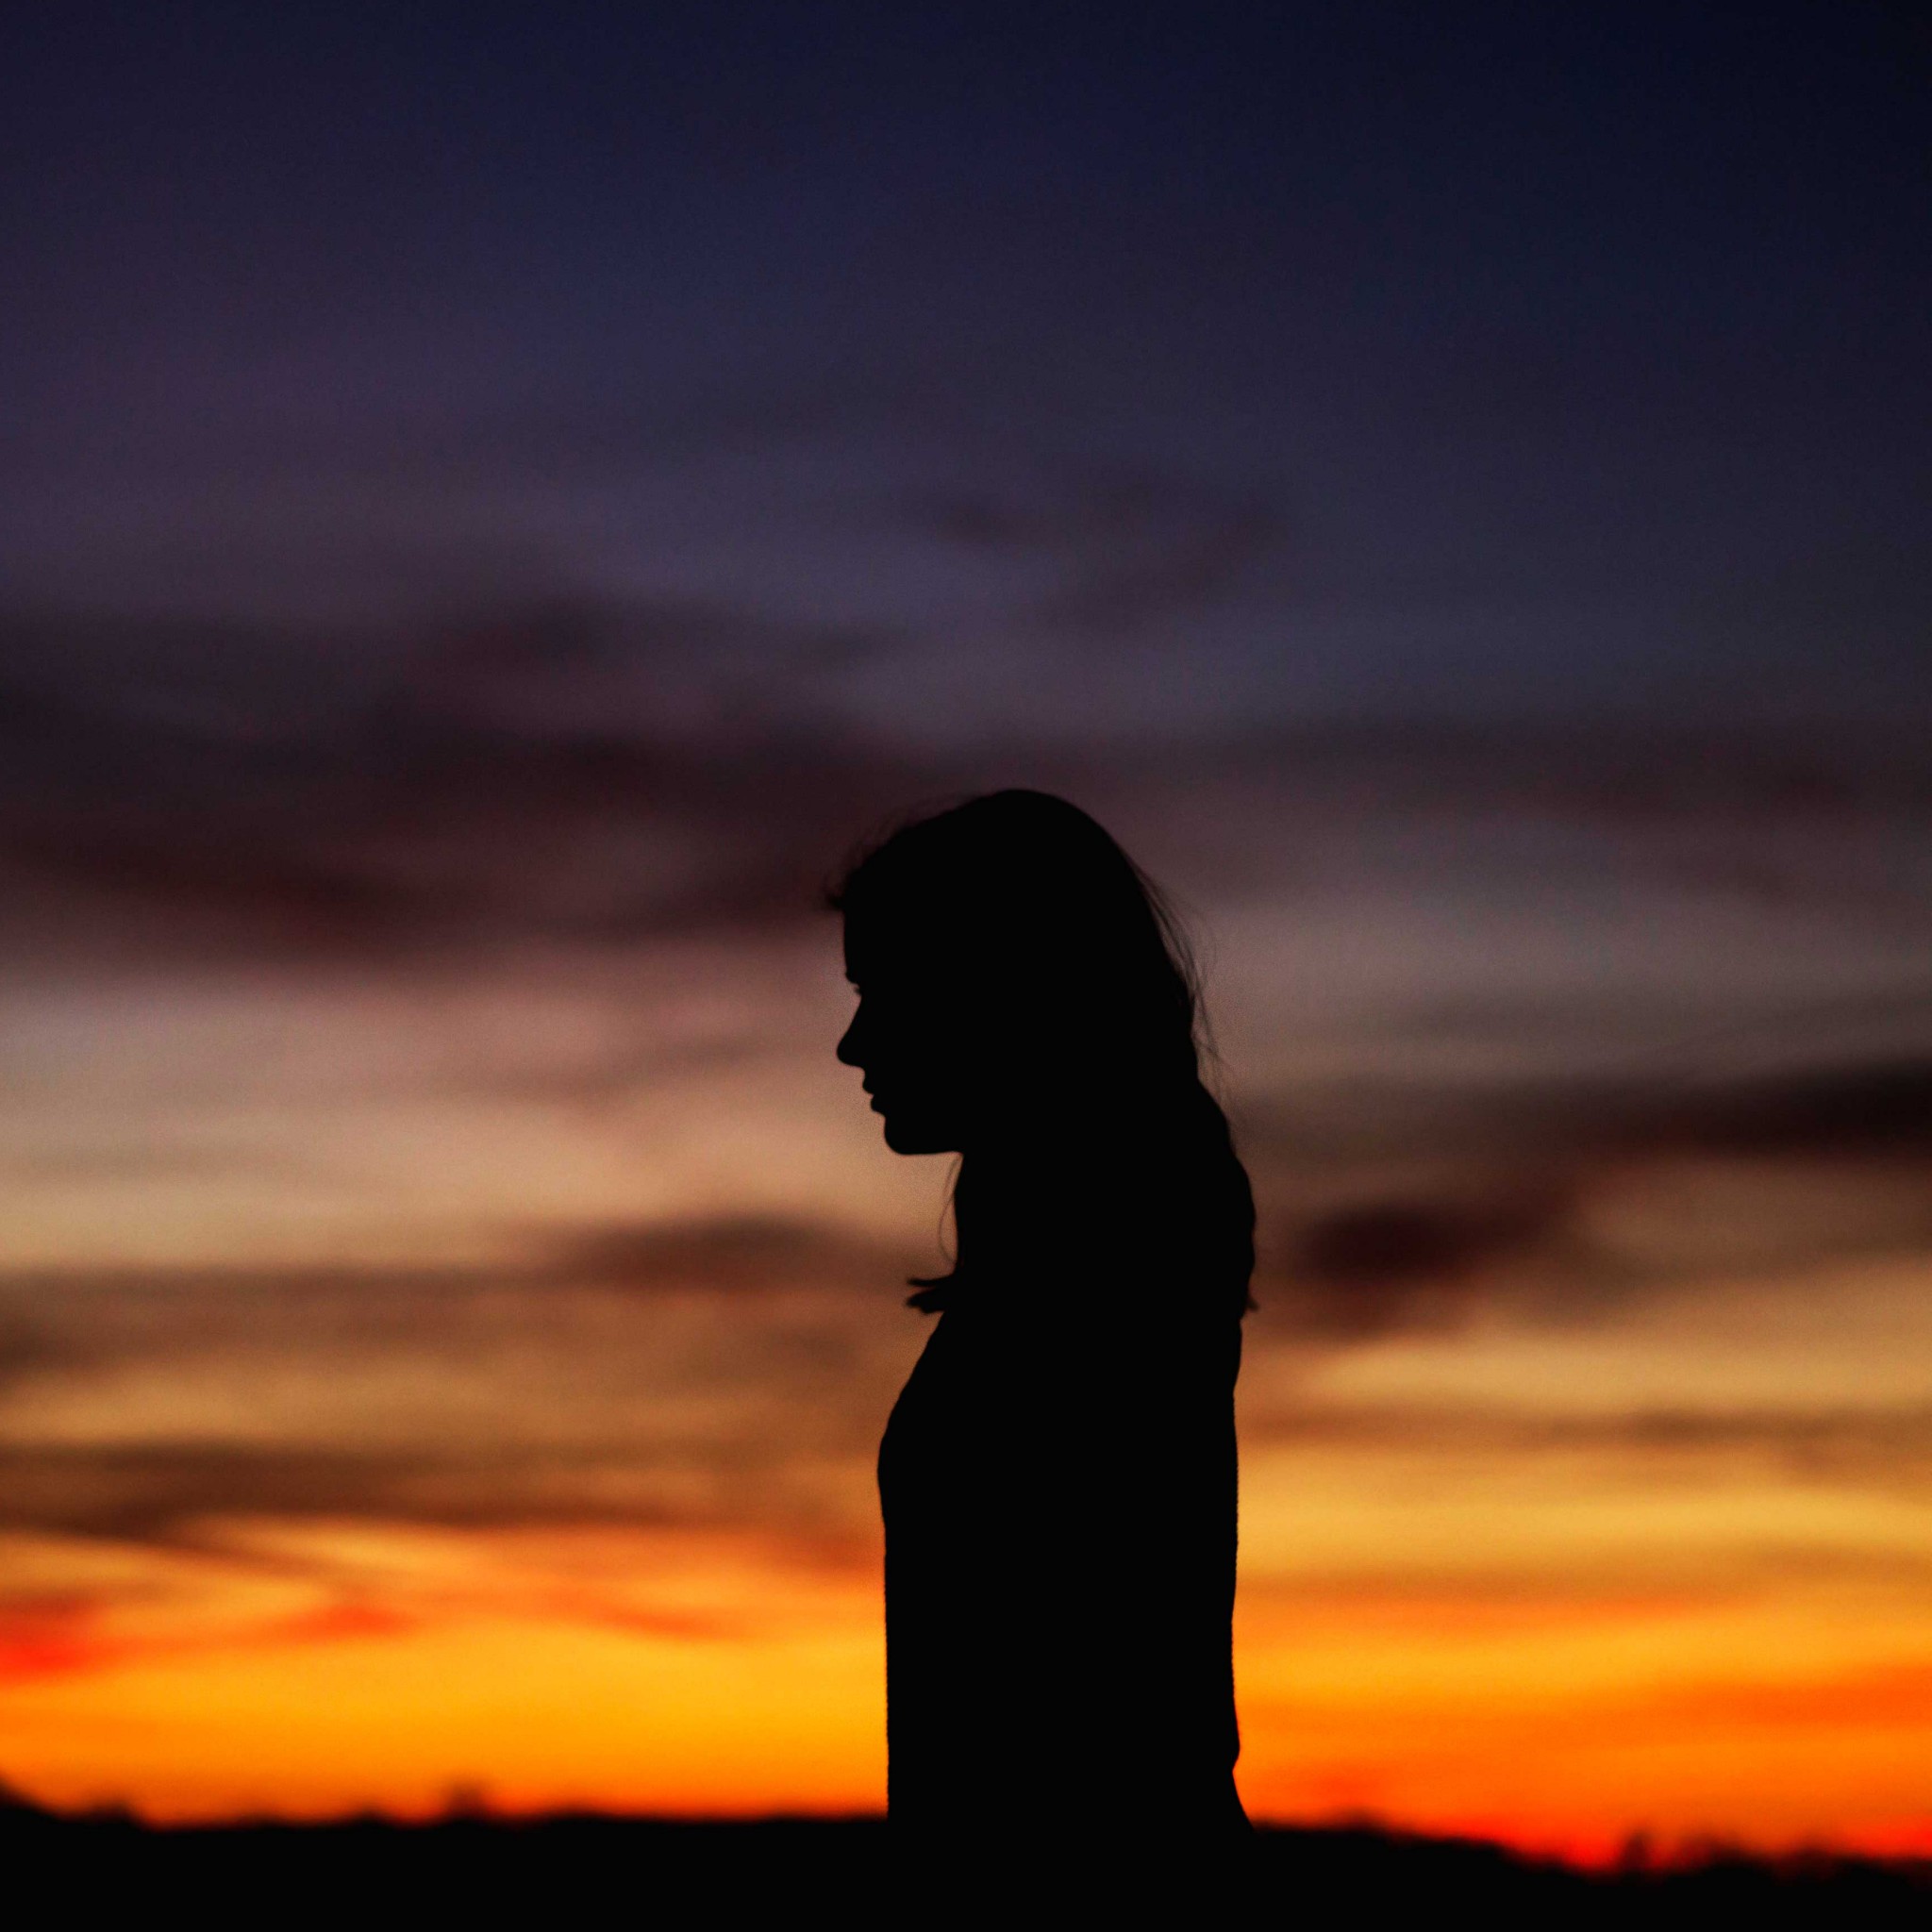 sad wallpaper download,sky,people in nature,silhouette,afterglow,sunset